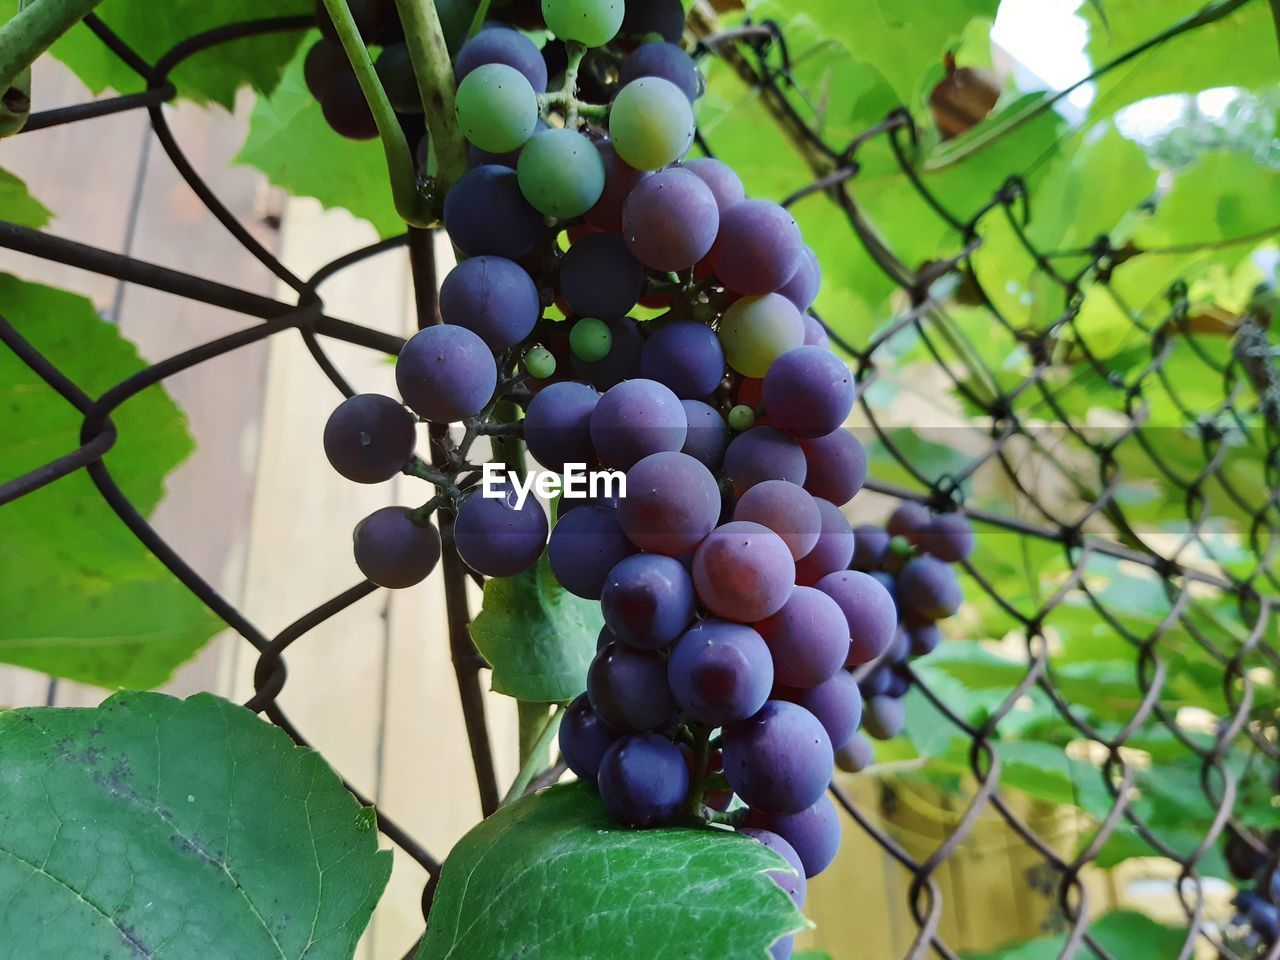 CLOSE-UP OF GRAPES GROWING ON TREE